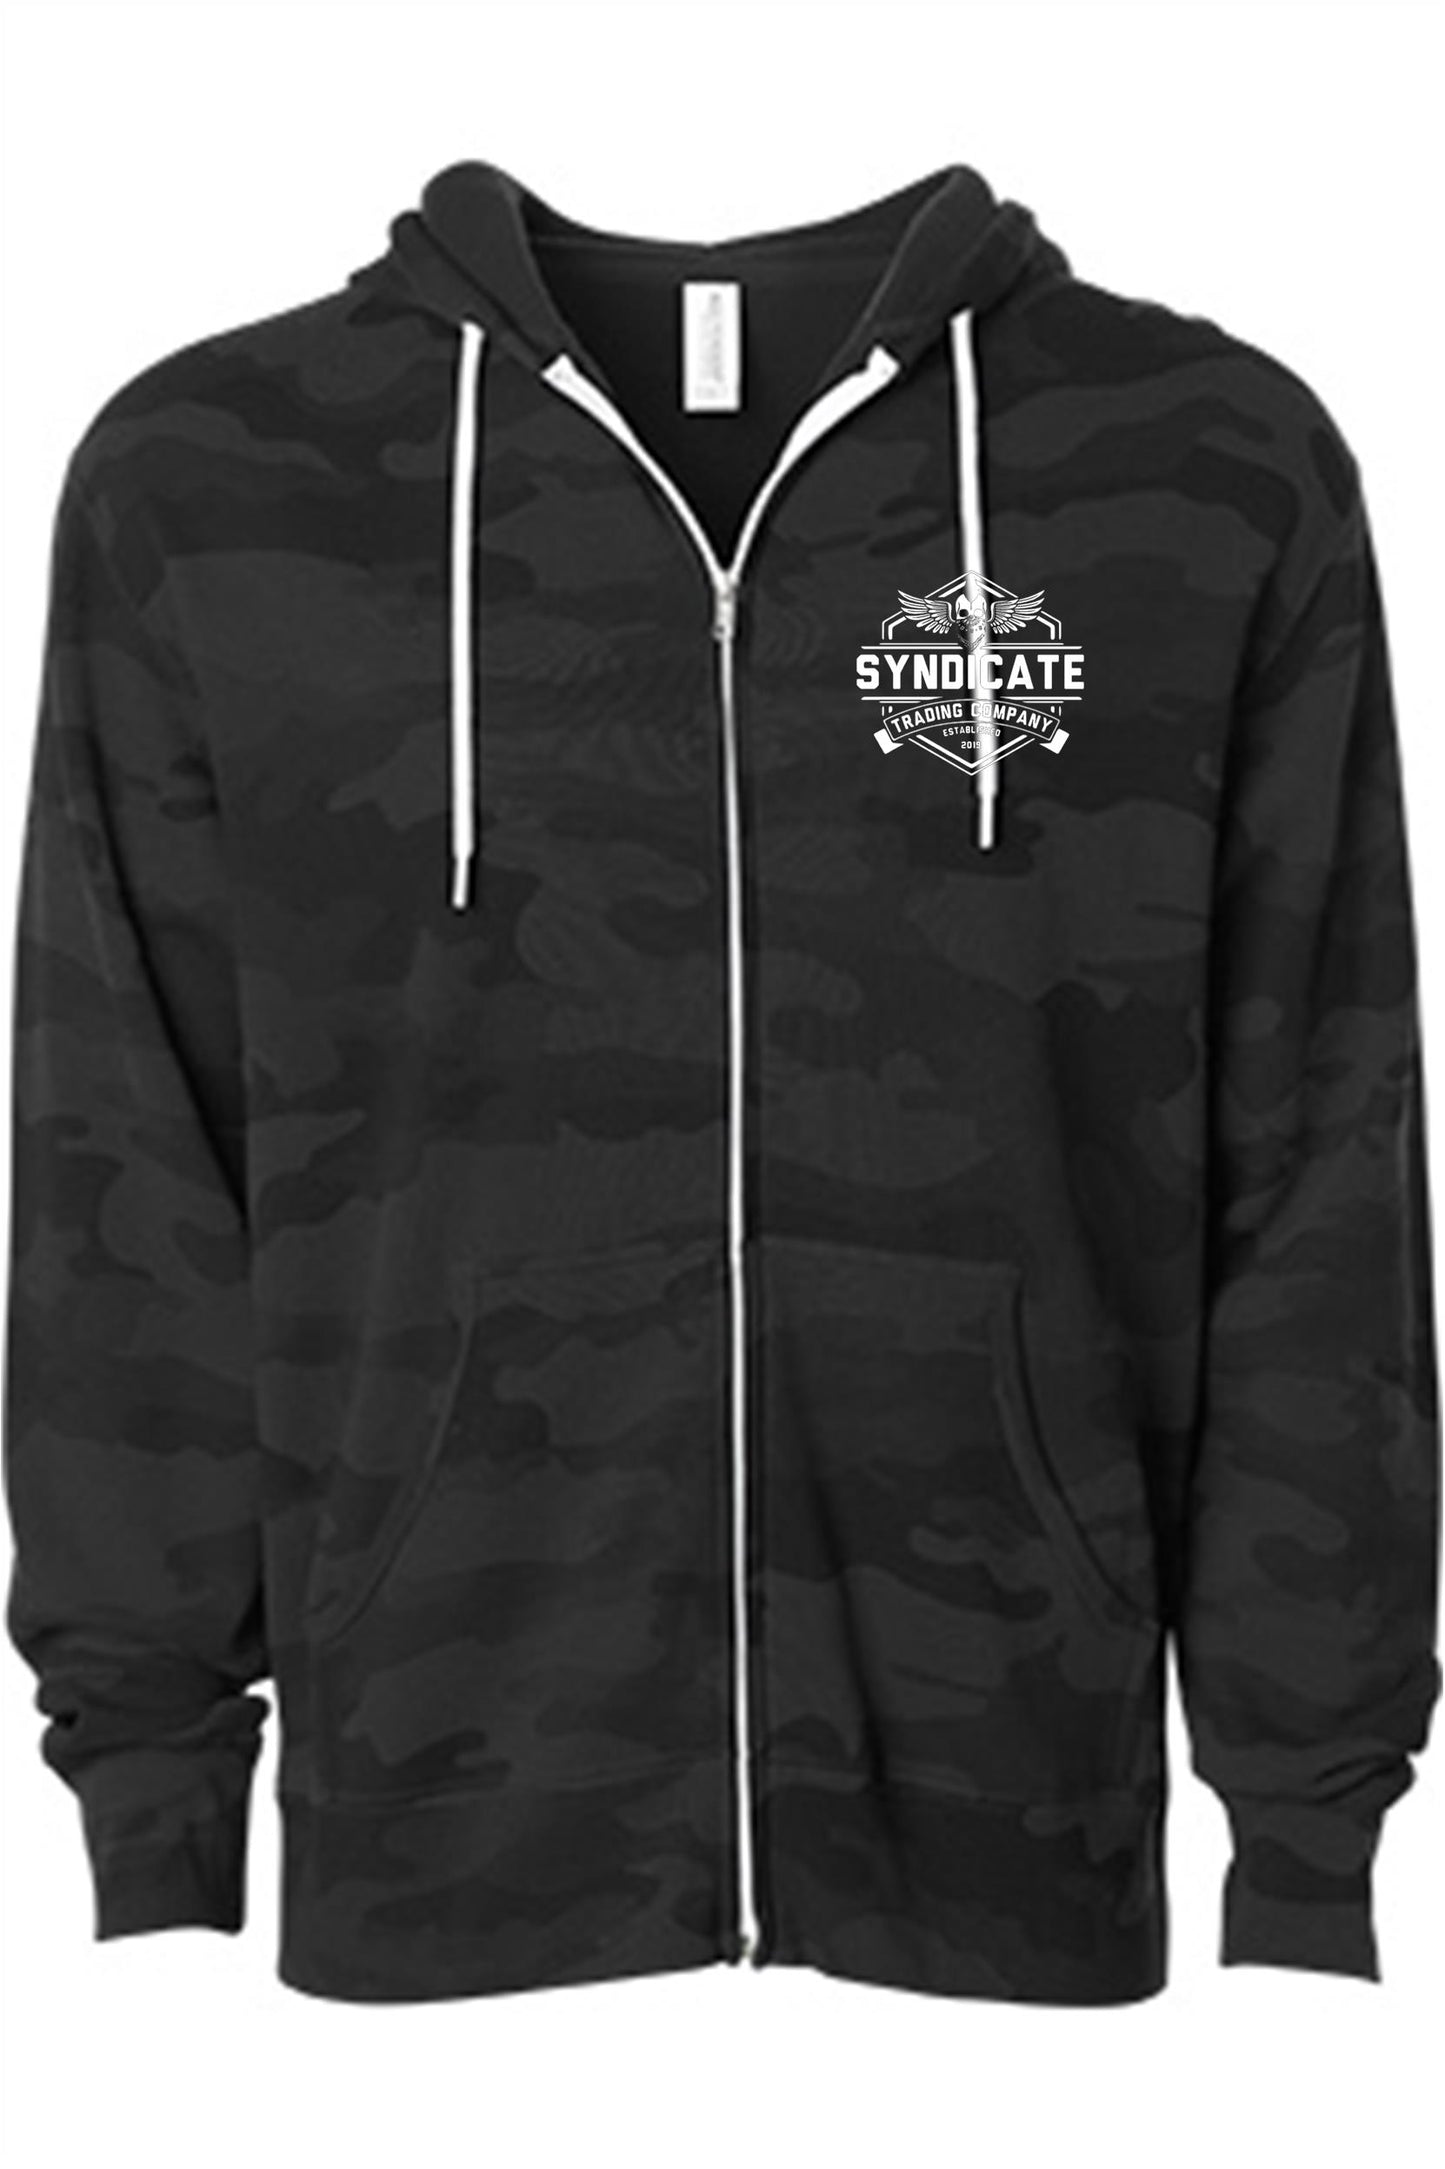 Limited Edition Badge Patch Full Zip Camo Unisex Hoodie